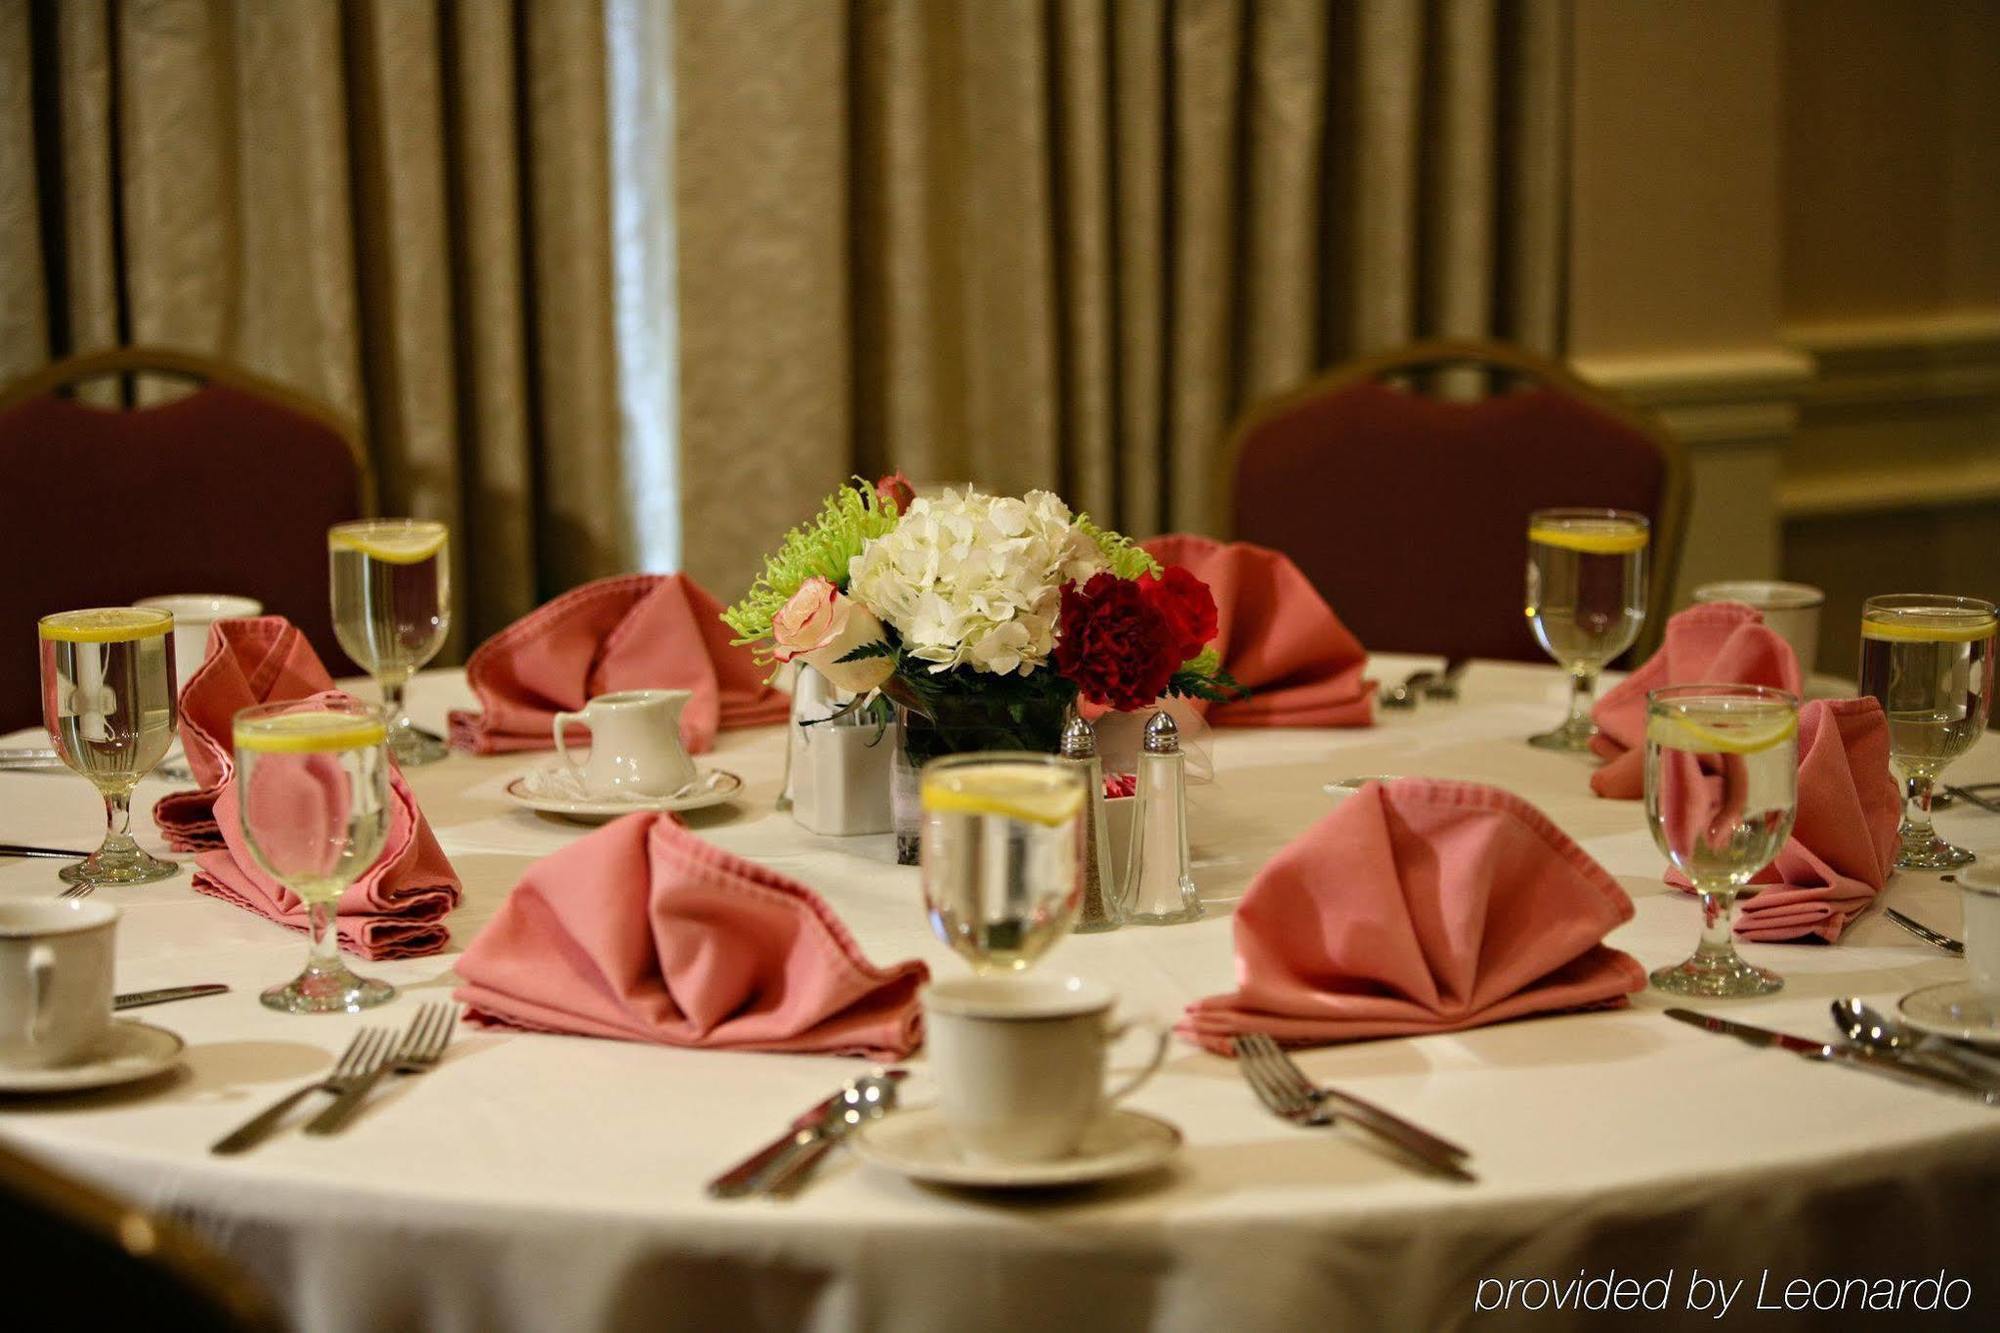 Radisson Hotel And Suites Chelmsford-Lowell Restaurante foto